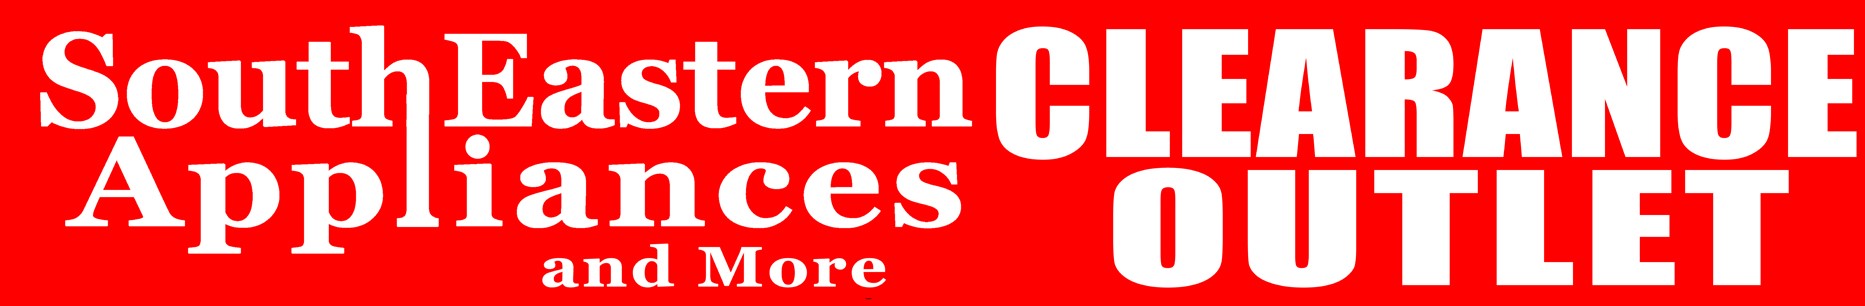 South Eastern Appliances and more - Clearance Outlet